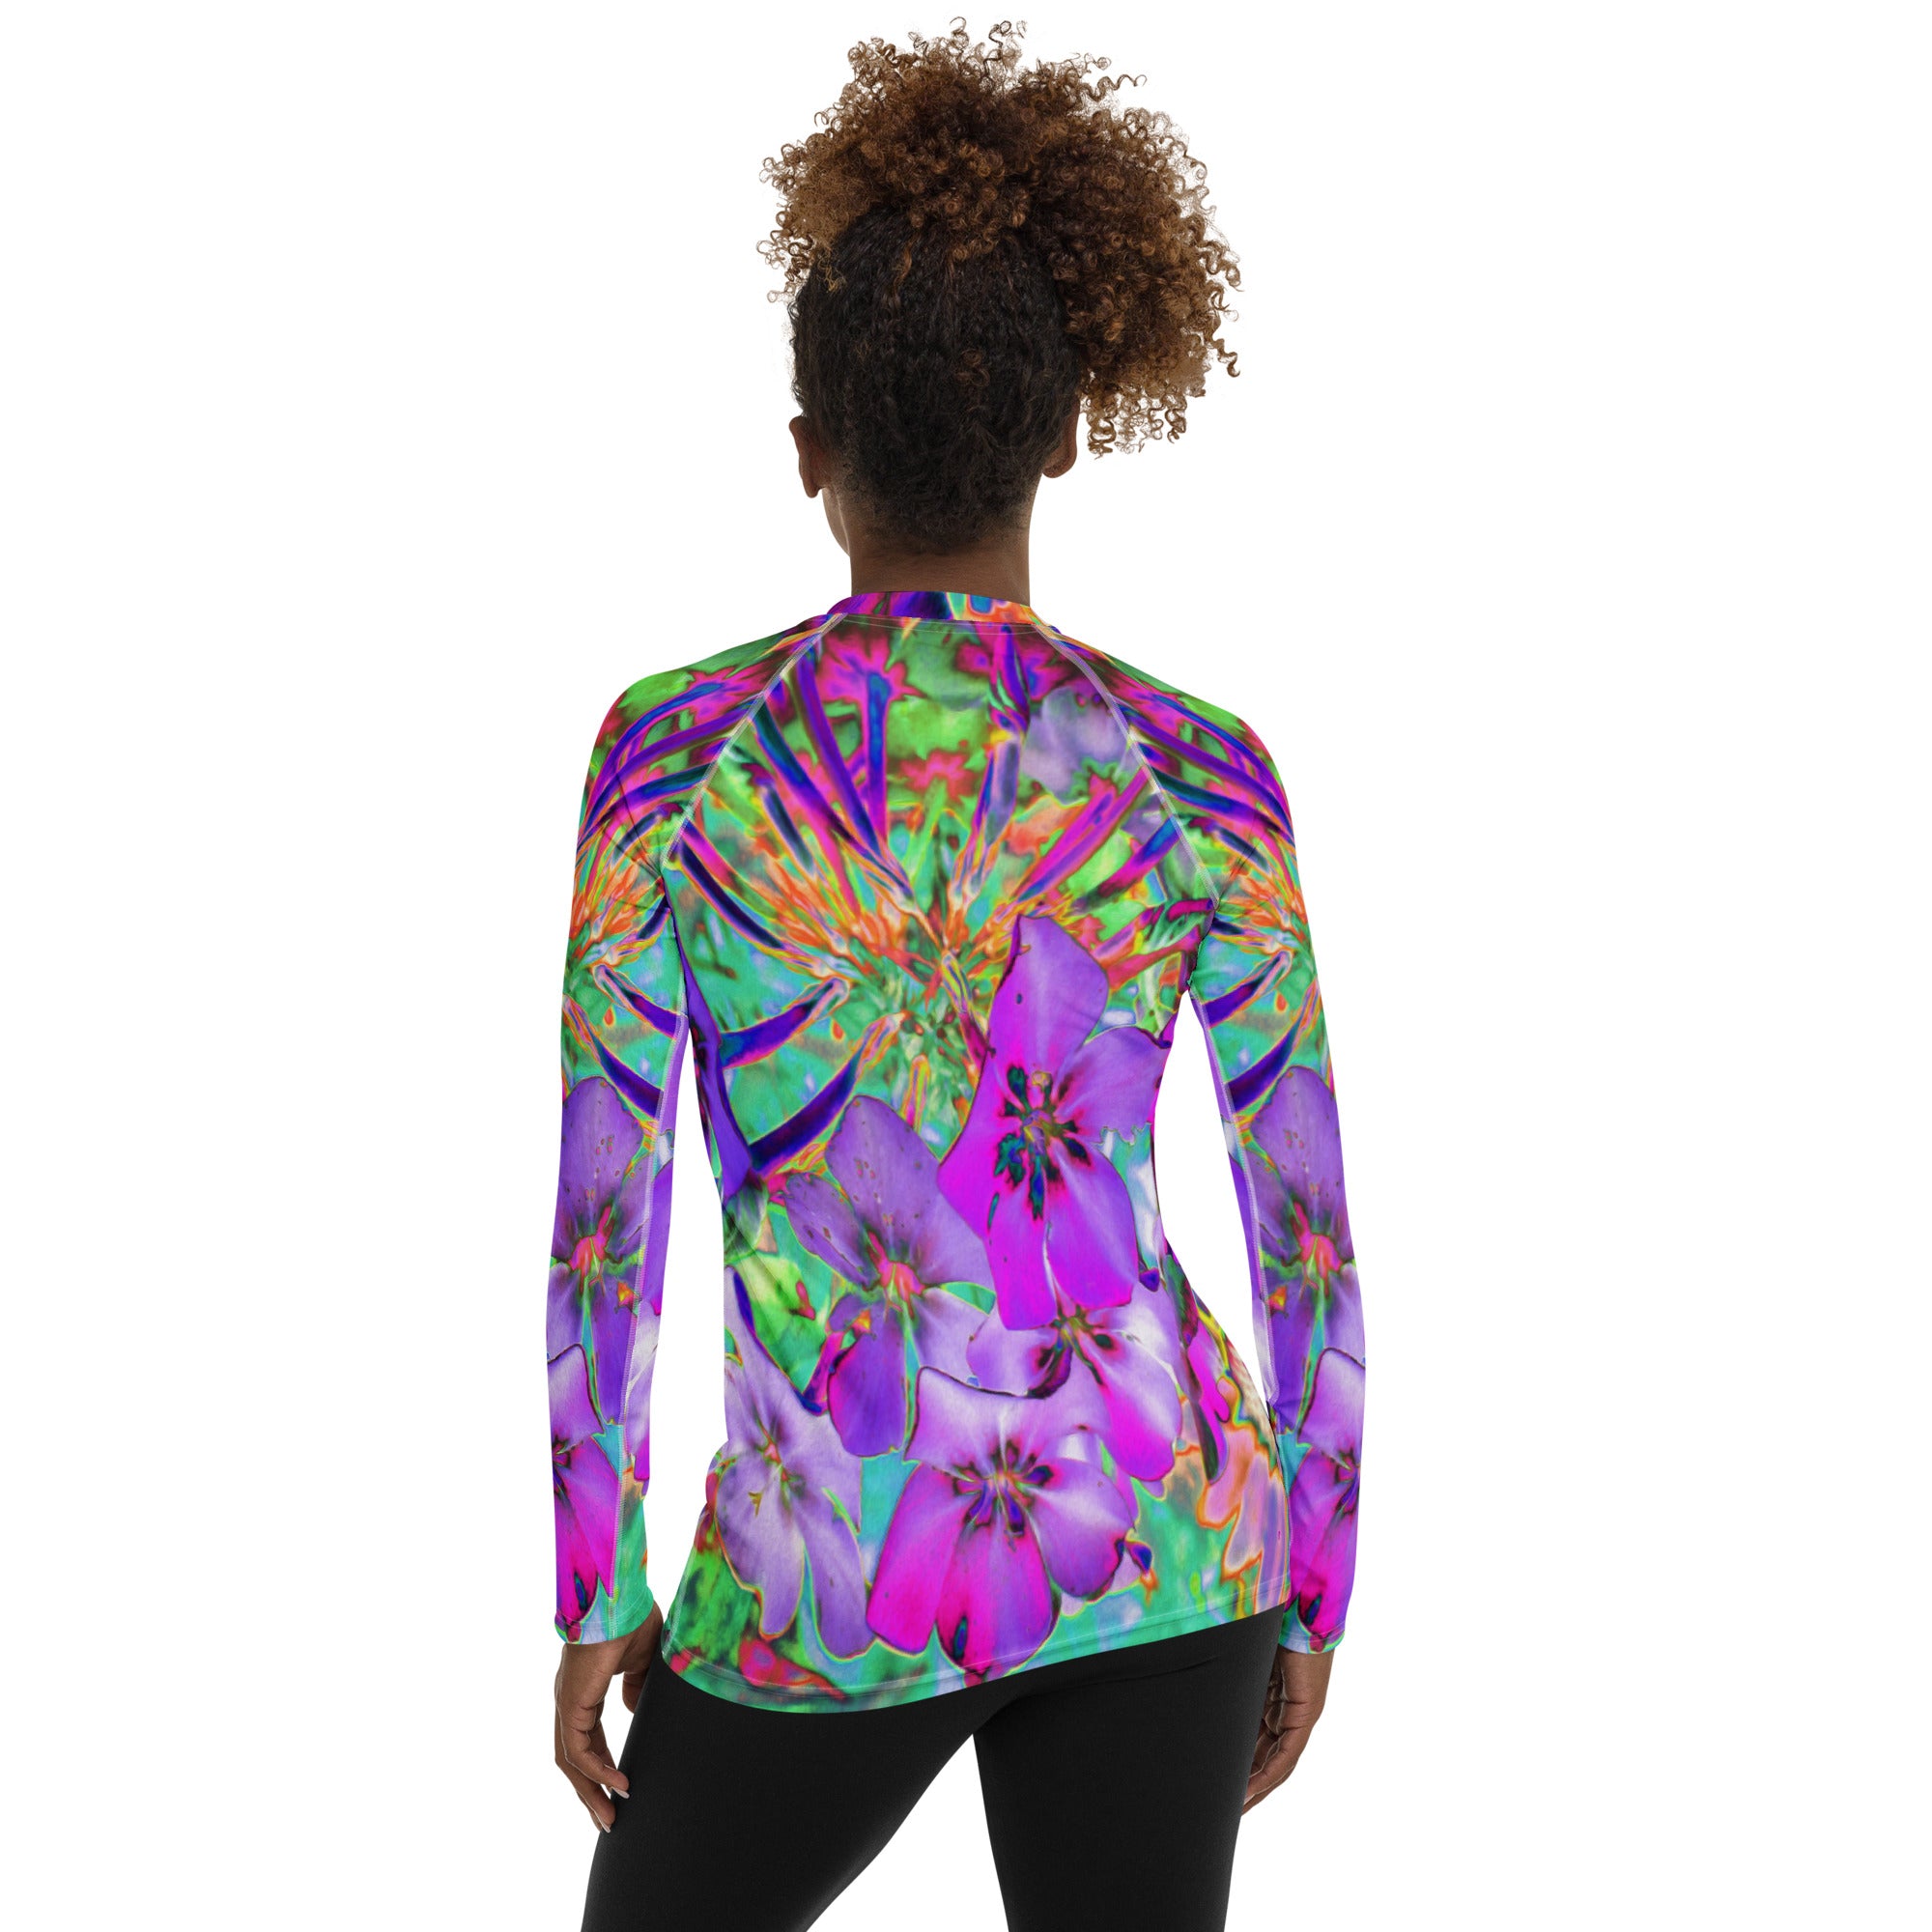 Women's Rash Guard Shirts, Dramatic Psychedelic Magenta and Purple Flowers